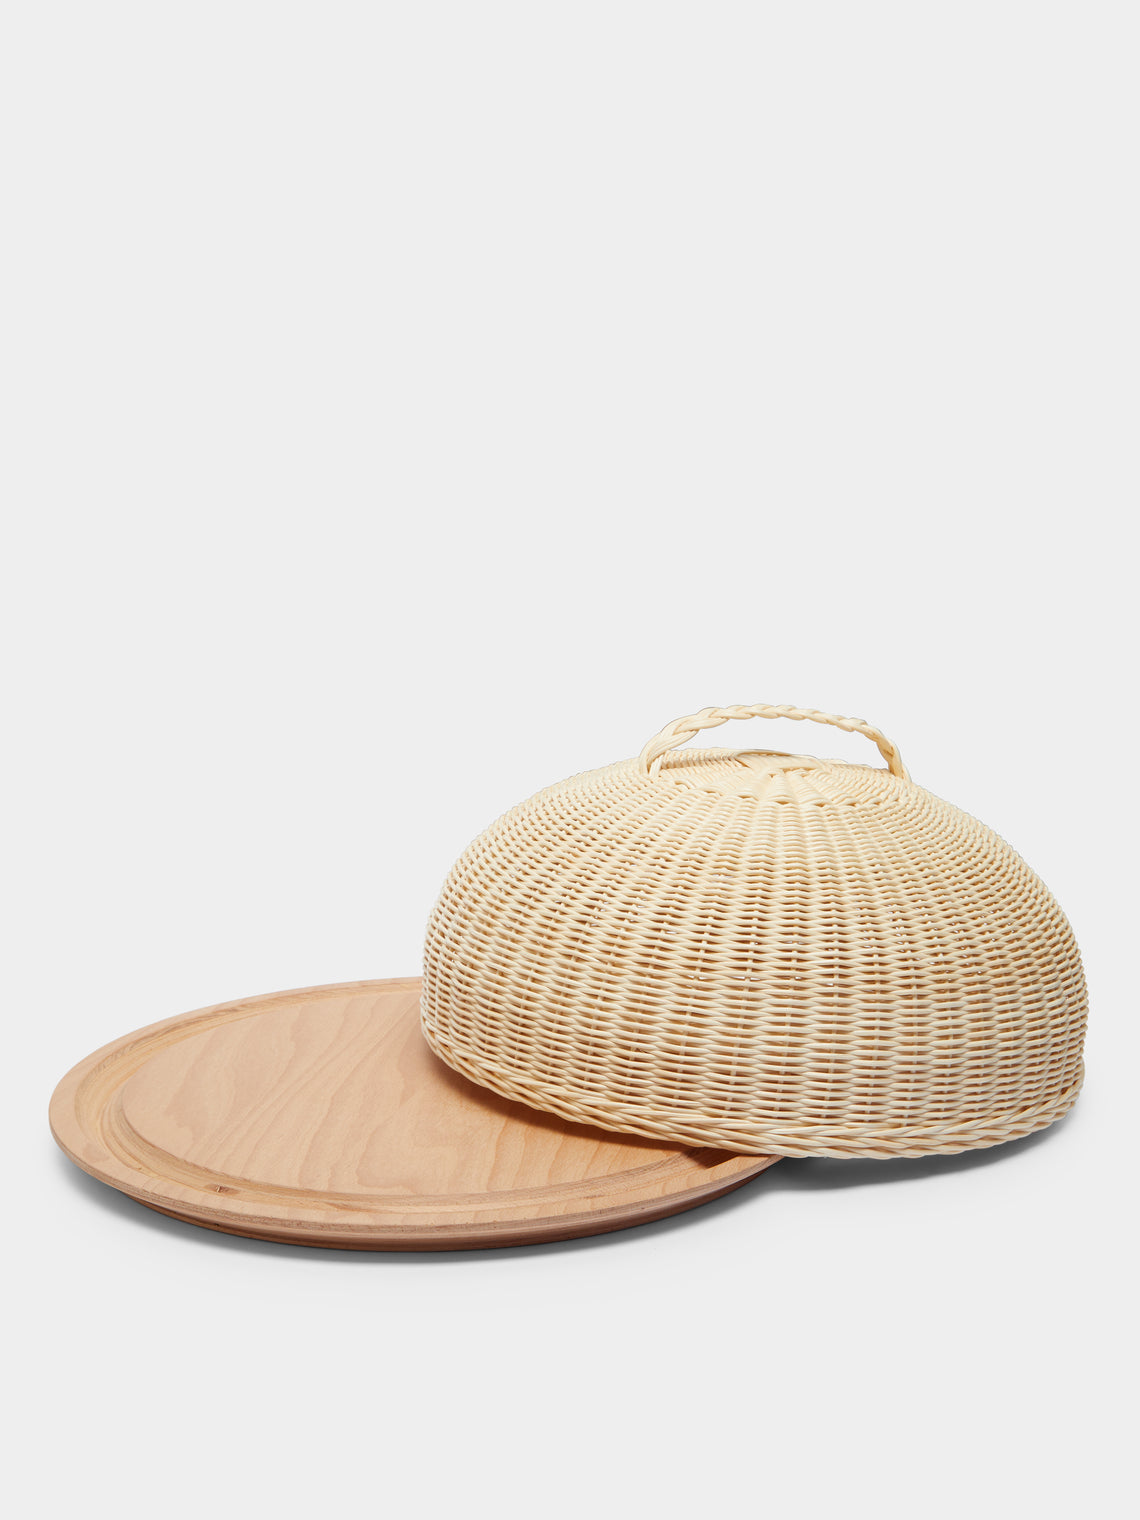 Mila Maurizi - Calla Handwoven Wicker and Wood Domed Cheese Plate -  - ABASK